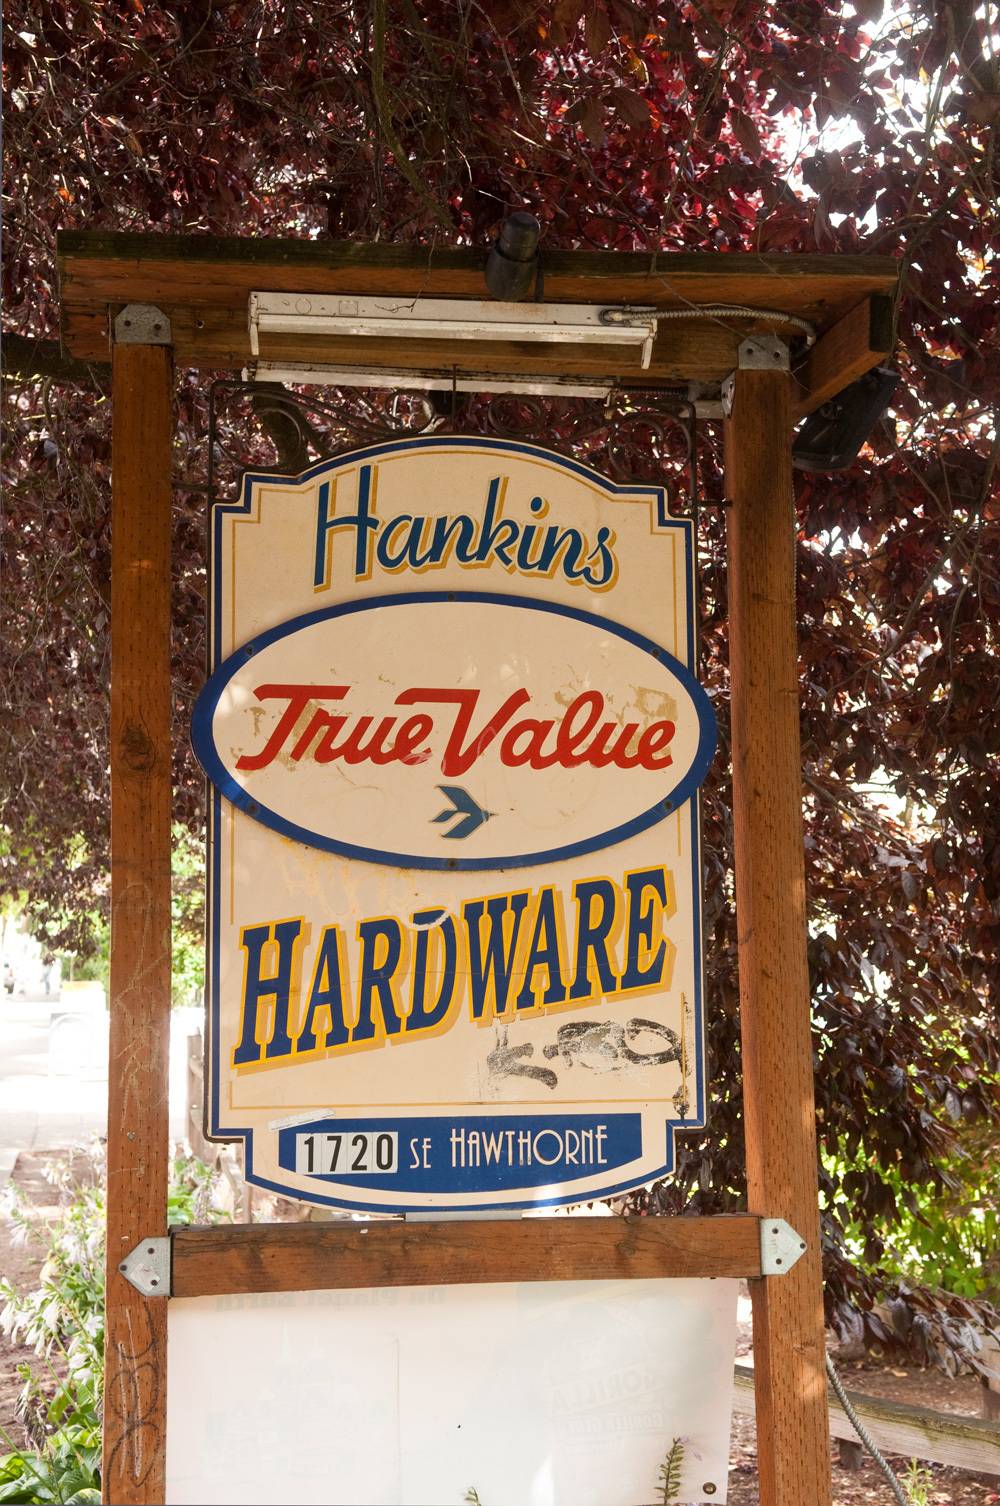 A sign in a wooden frame shows where a hardware store is.